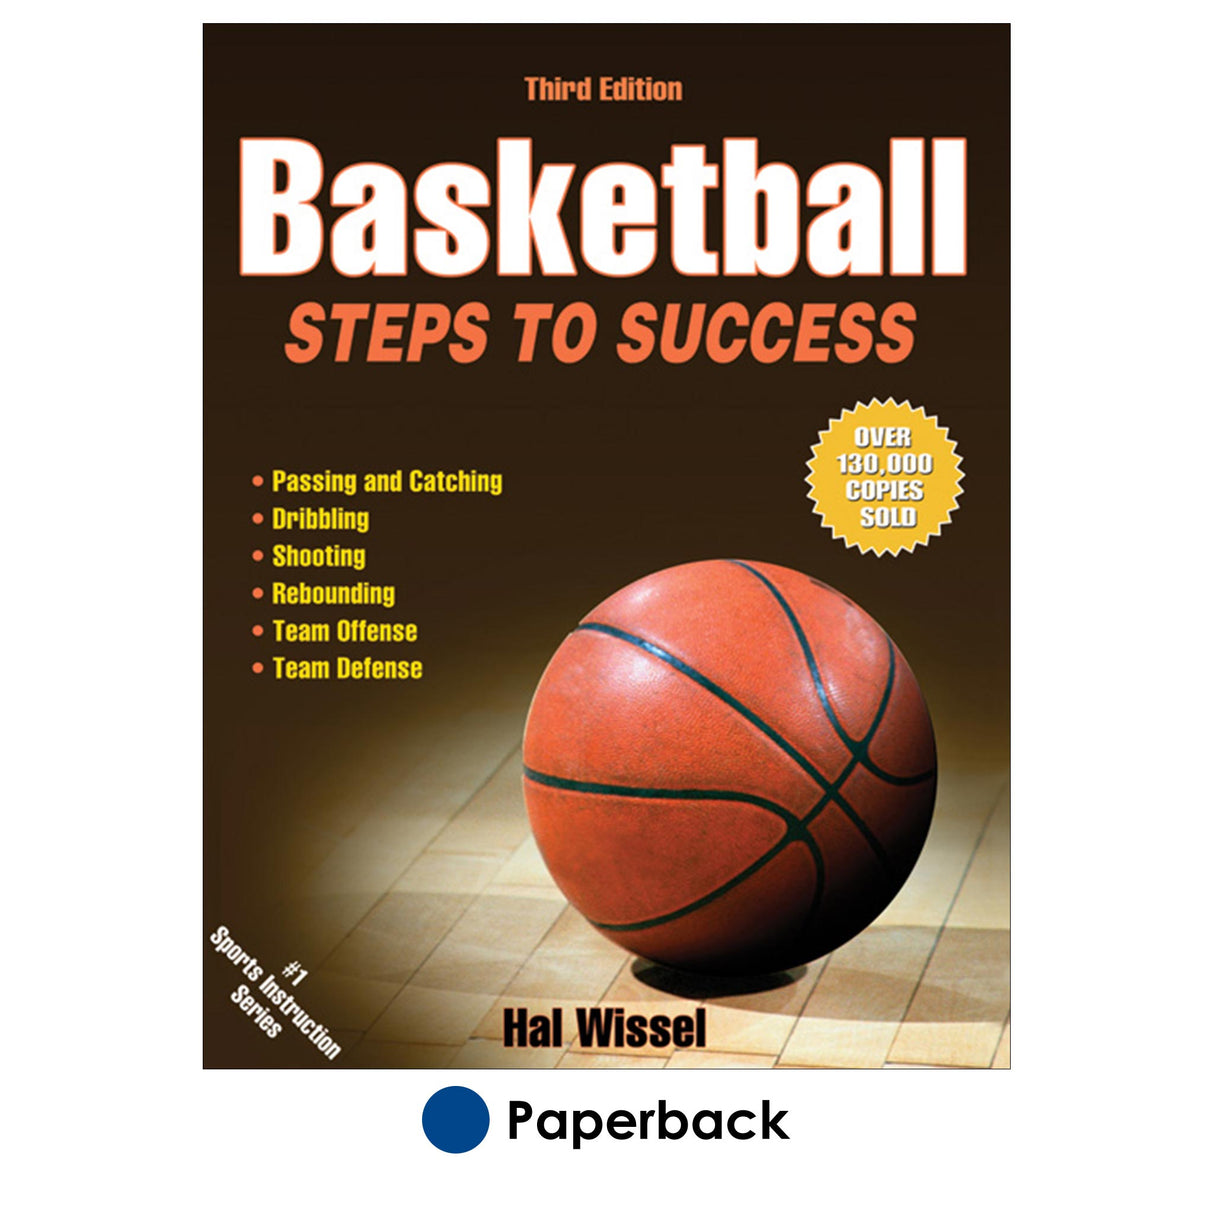 Basketball: Steps to Success-3rd Edition